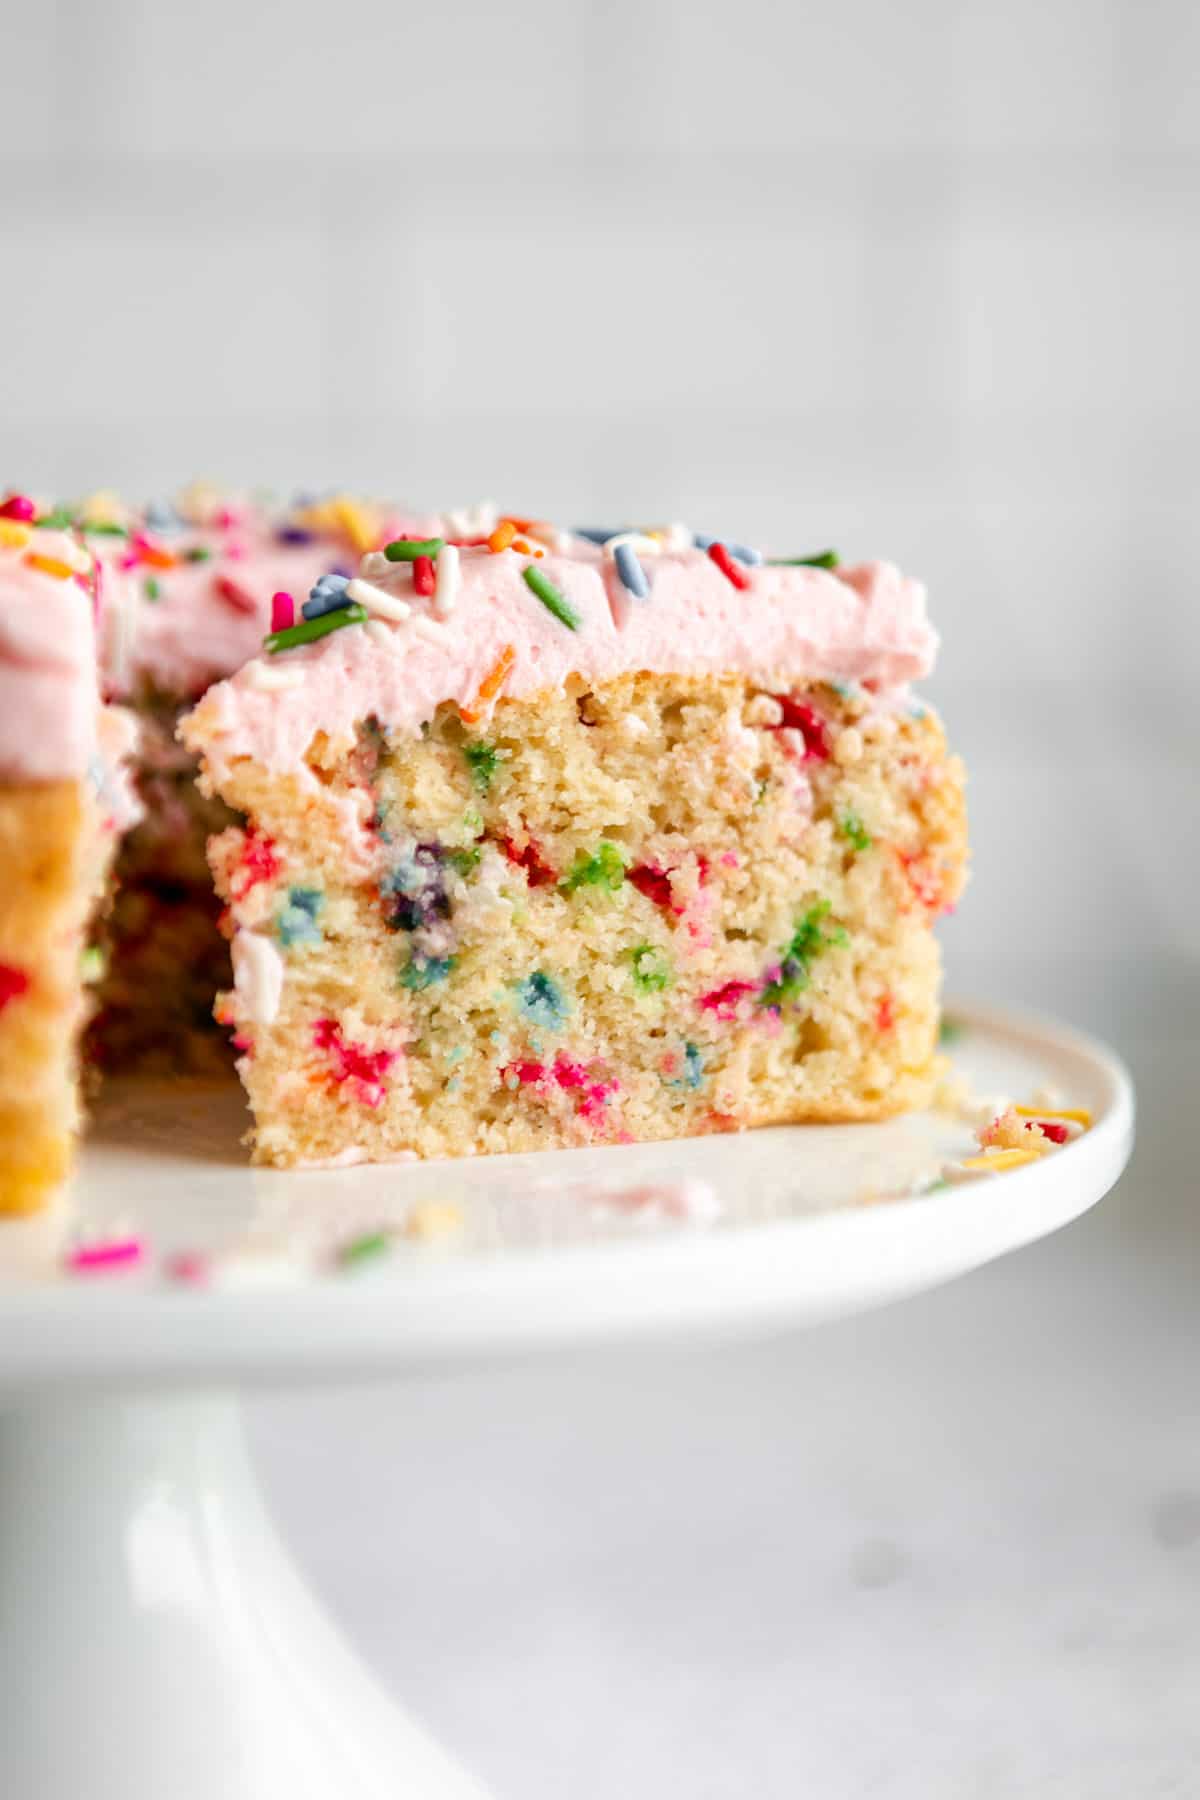 funfetti birthday cake with sprinkles and pink frosting